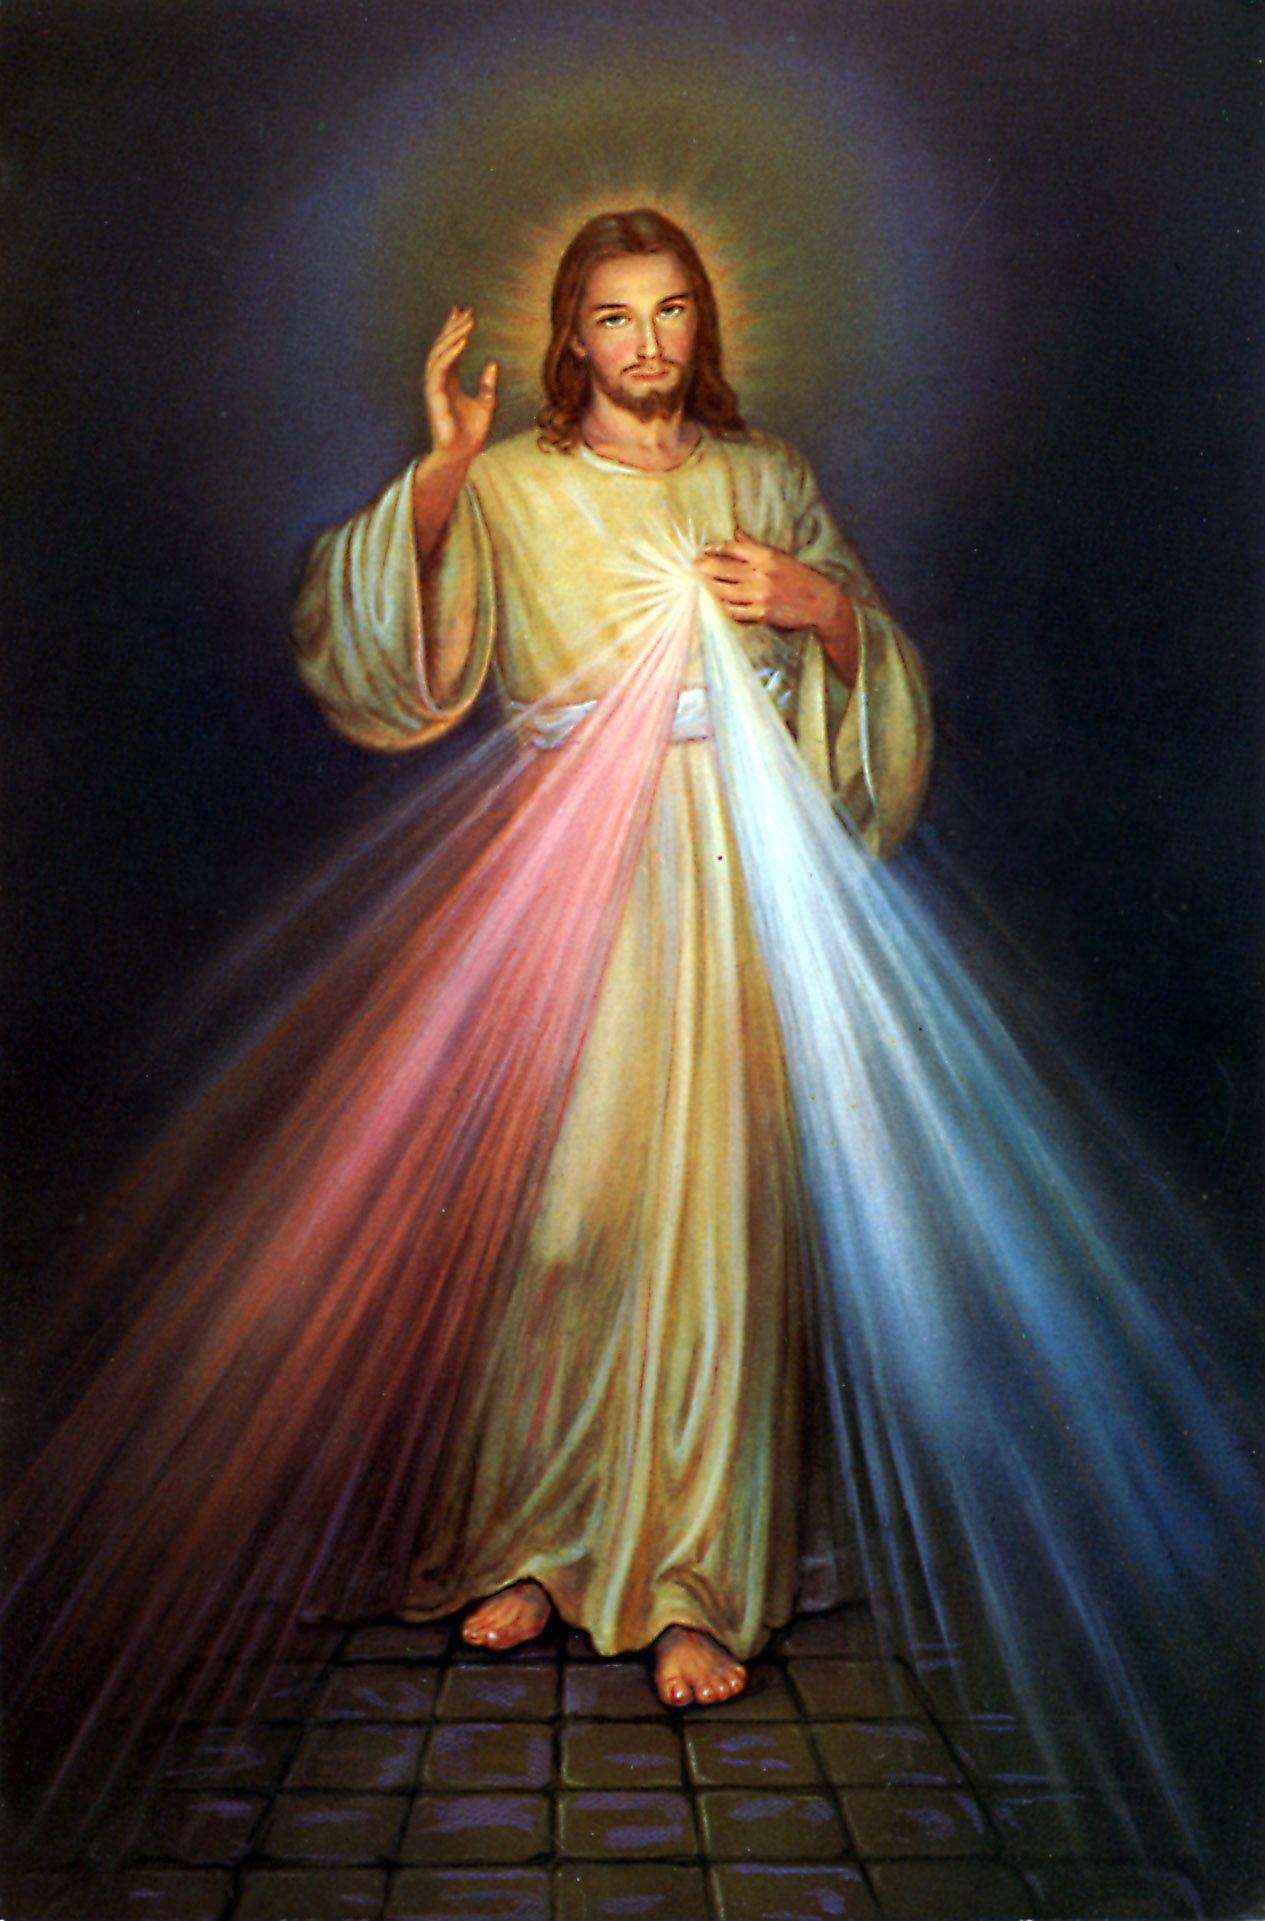 Consecration Prayer to the Sacred Heart of Jesus. The Catholic